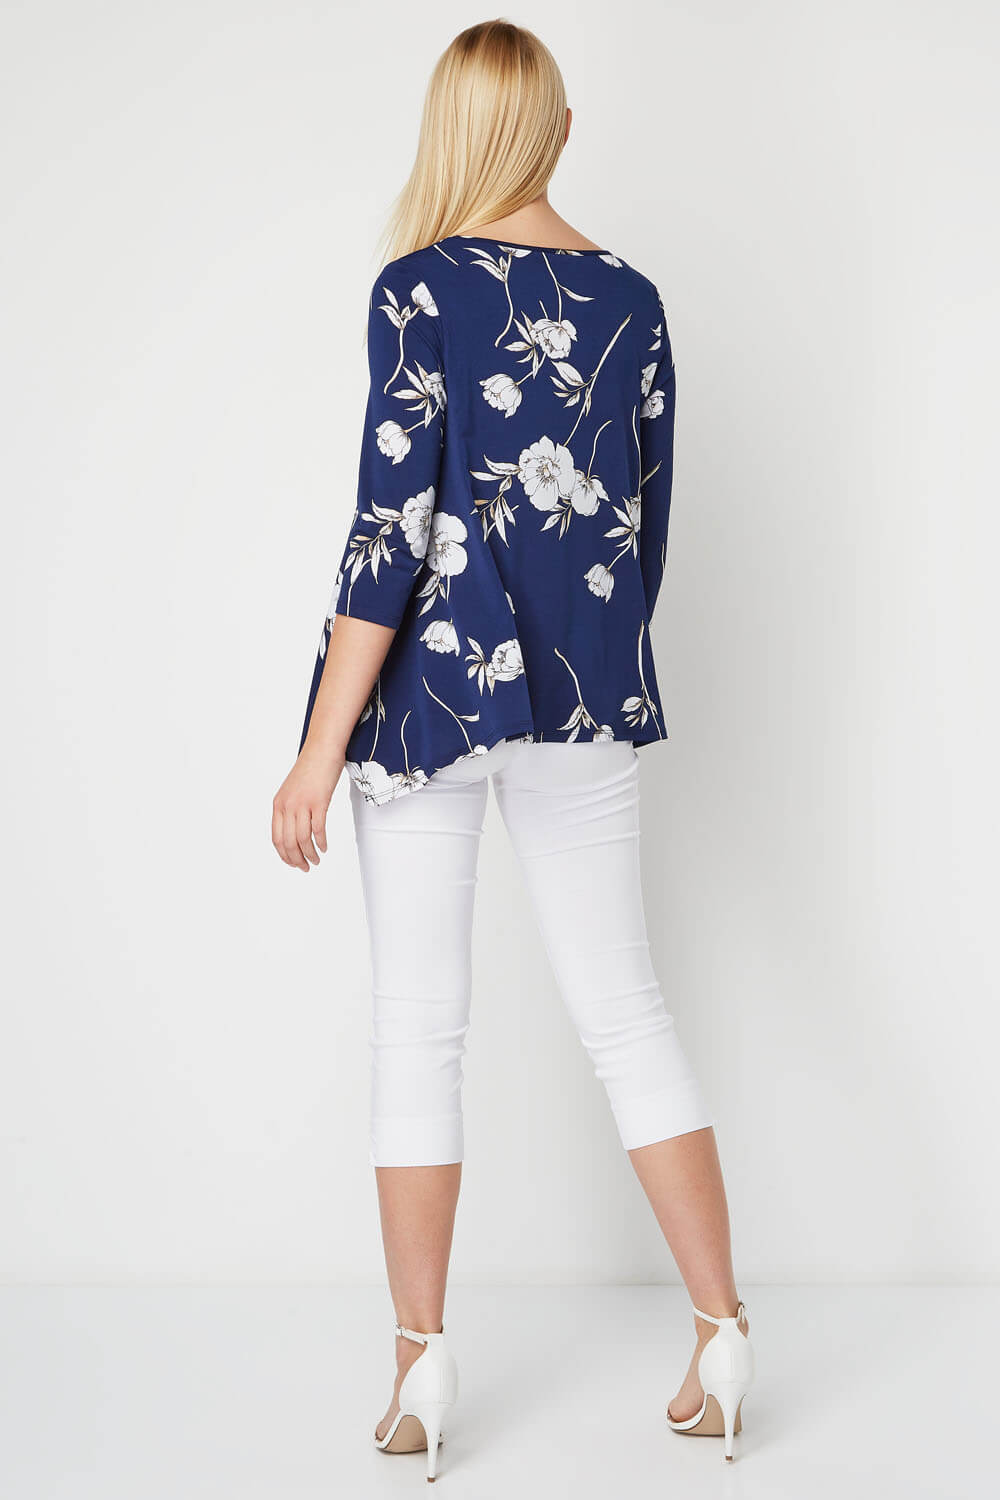 Navy  Floral 3/4 Sleeve Smock Top, Image 3 of 8